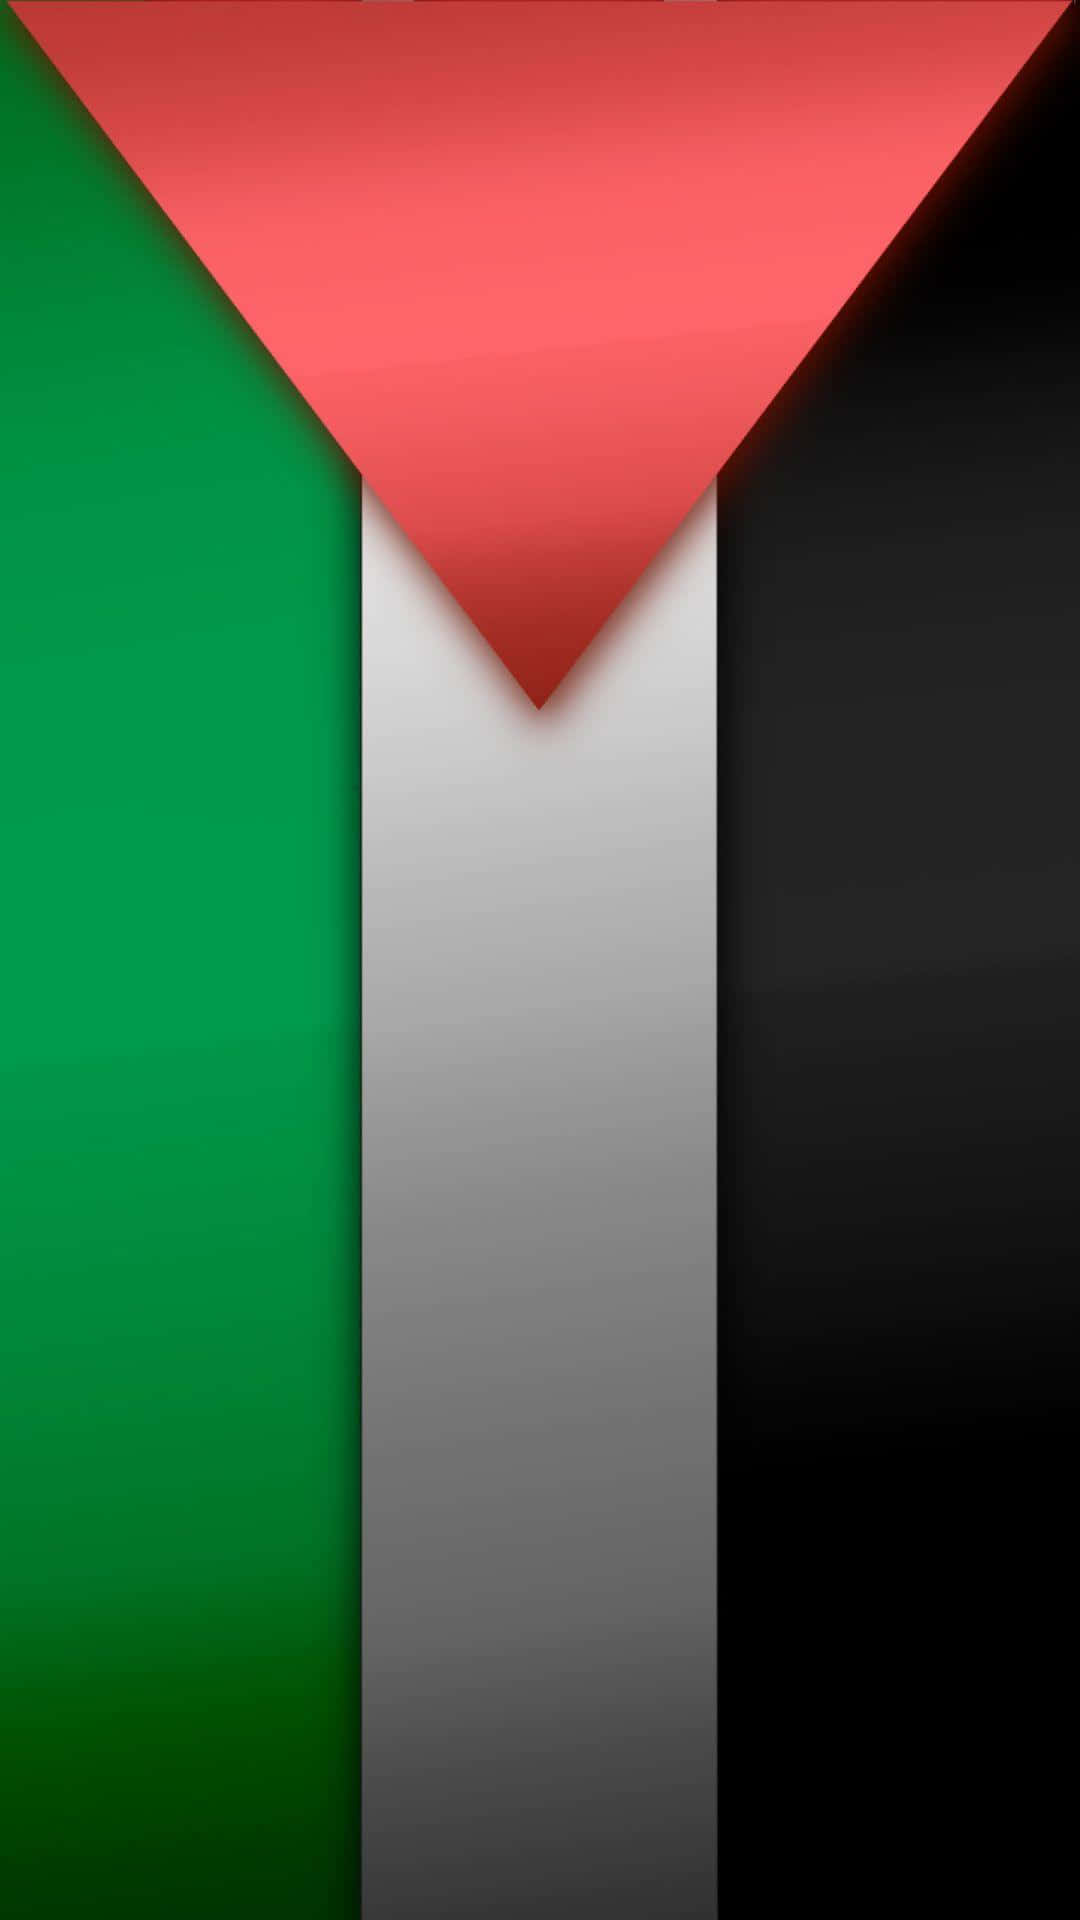 HD wallpaper: red, black, white, and green flag, UAE, backgrounds, textured  | Wallpaper Flare